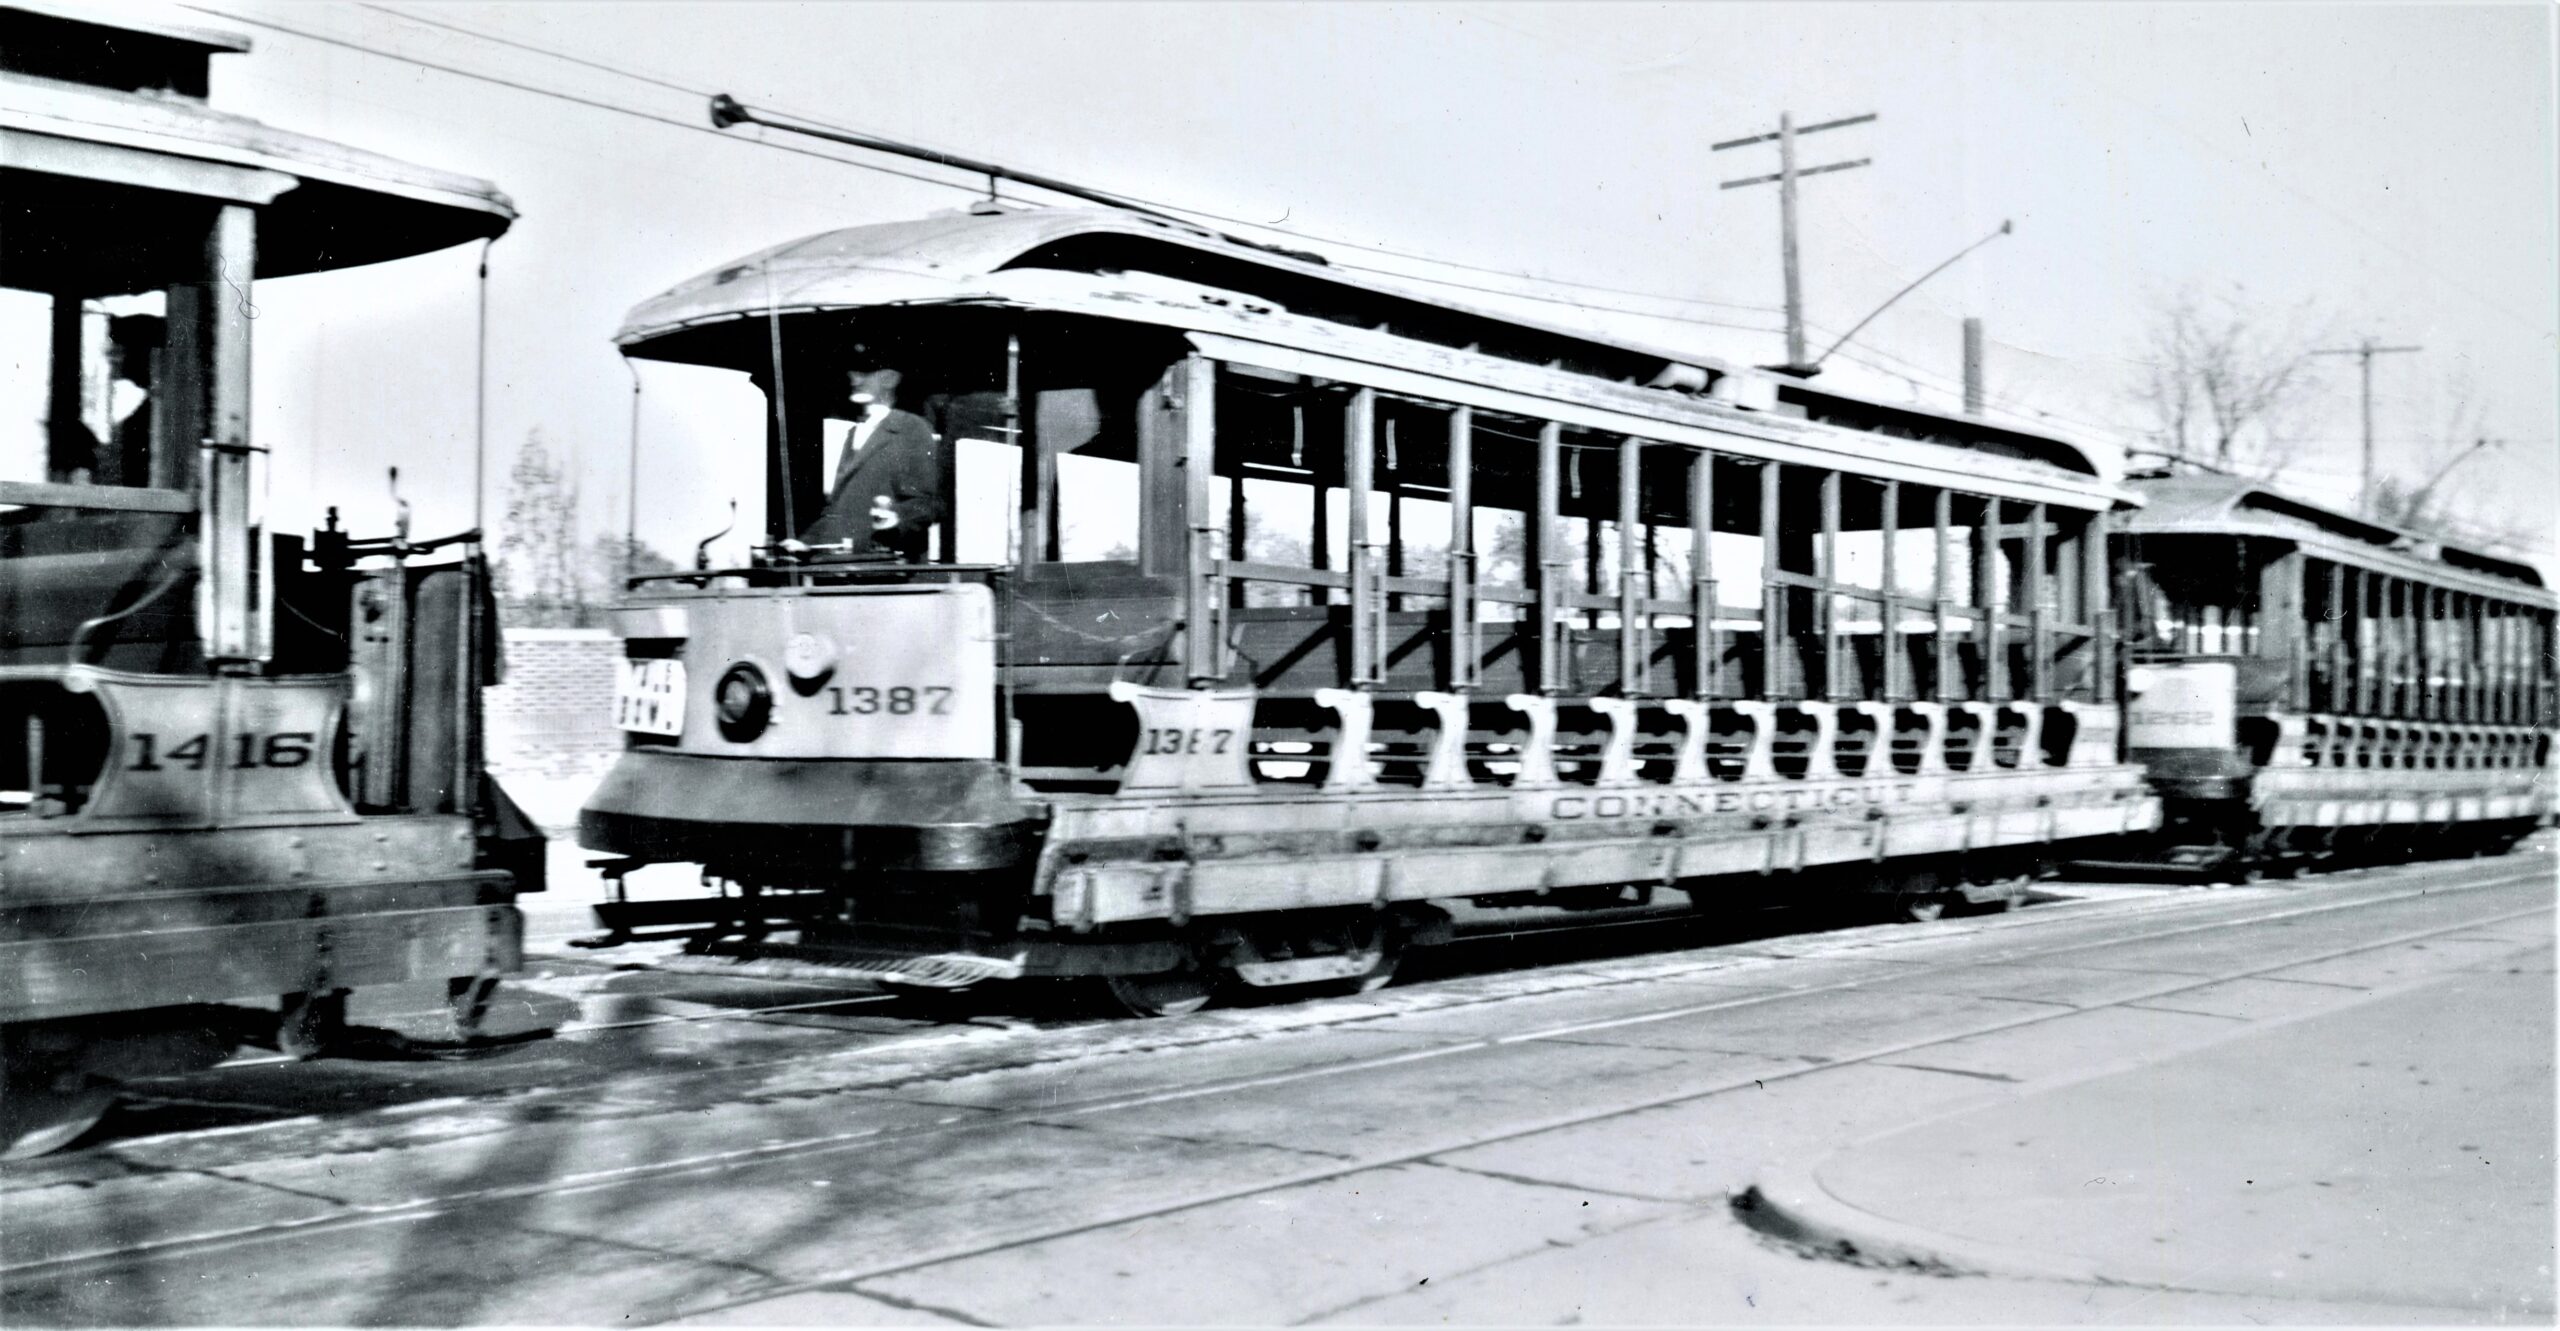 Connecticut Company | New haven, Connecticut | Yale University | Open bench trolley car #1387 | 1940 | h. L. Younger photograph | Elmer Kremkow collection